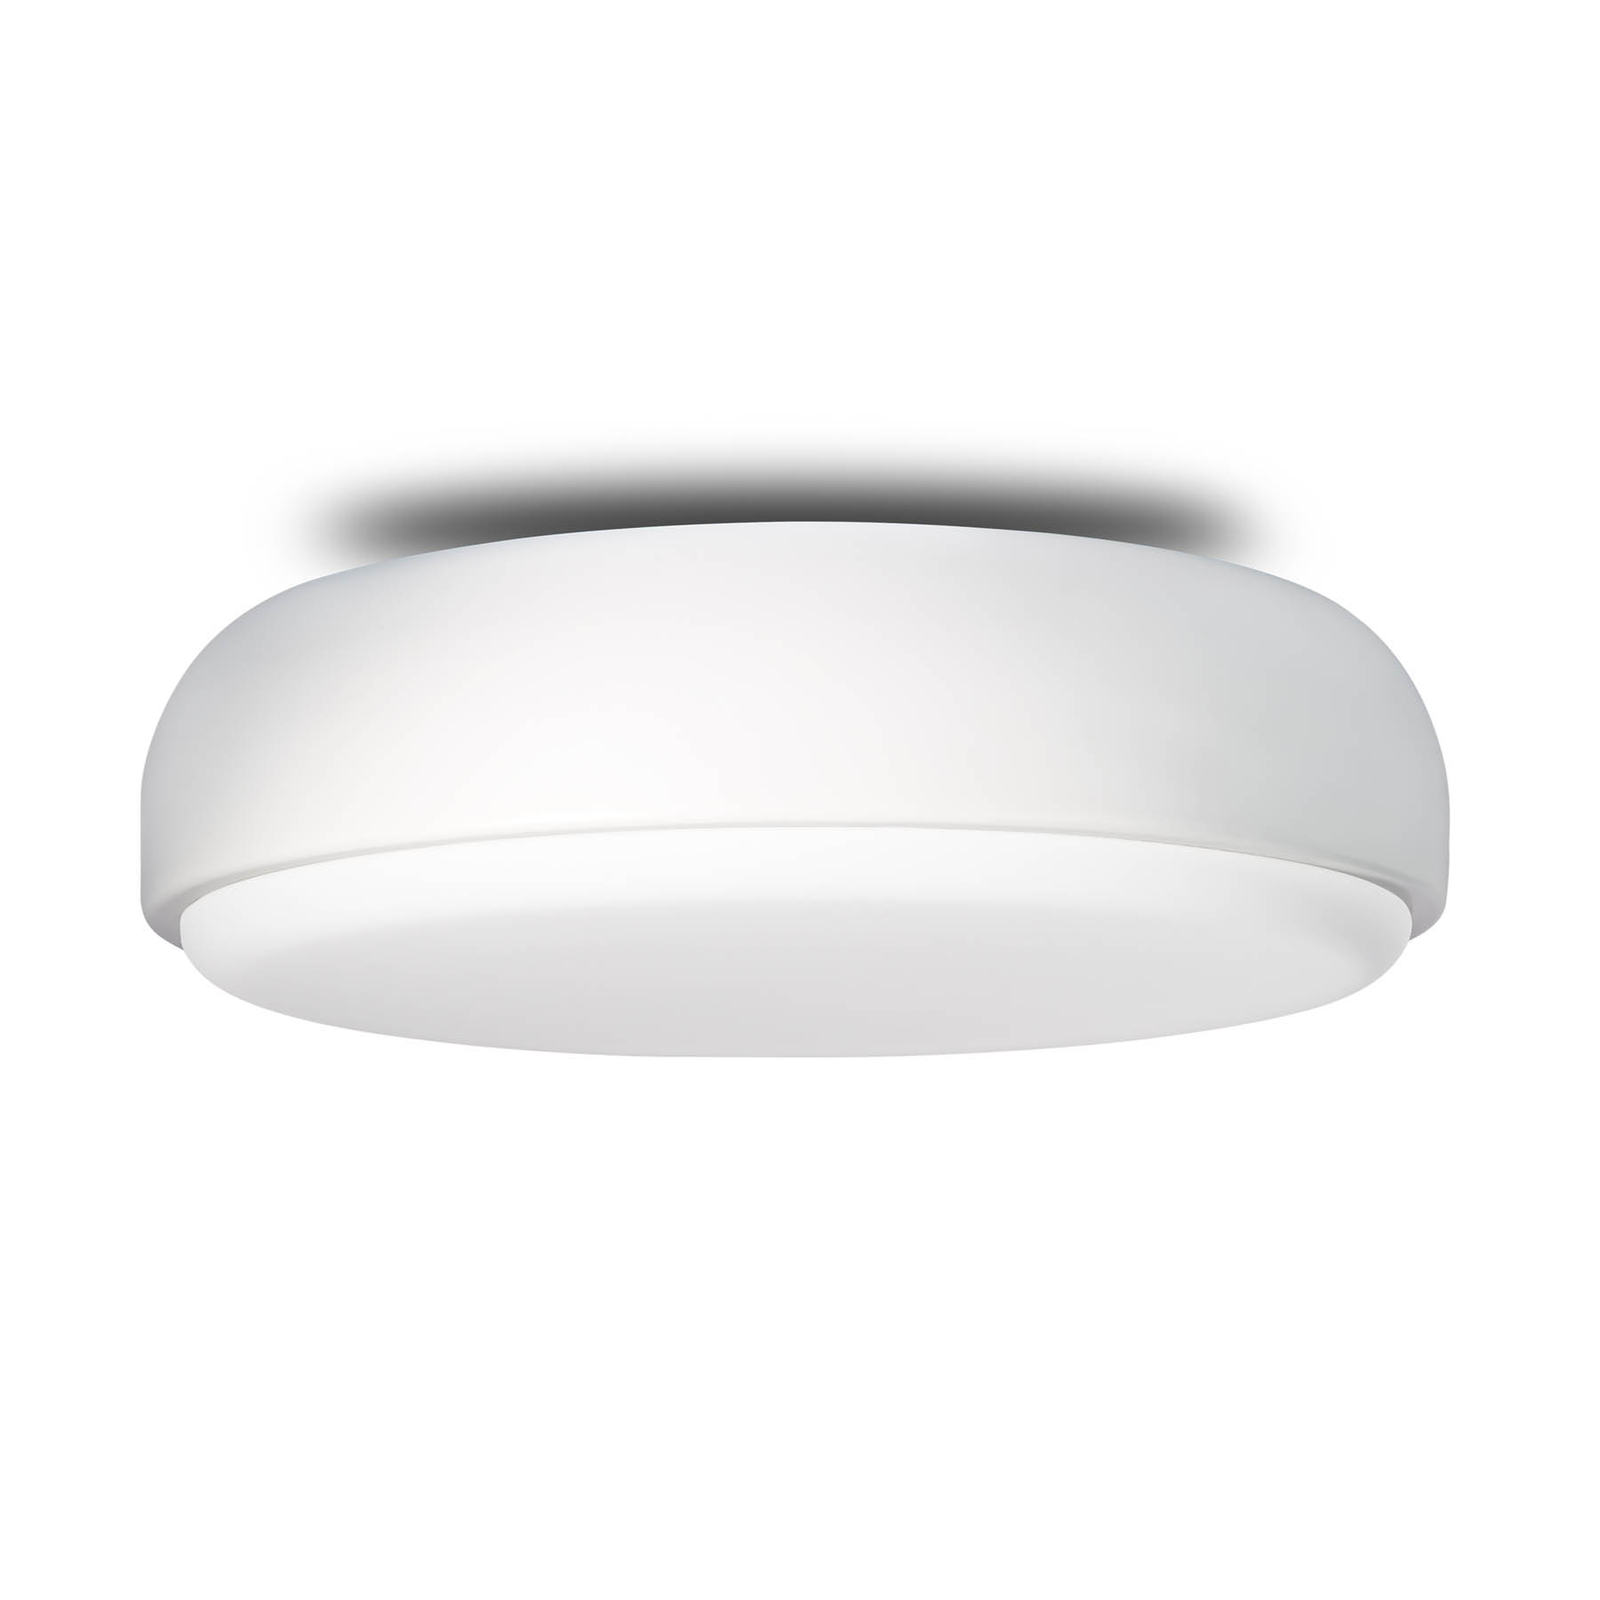 Northern Over Me ceiling light white 50 cm